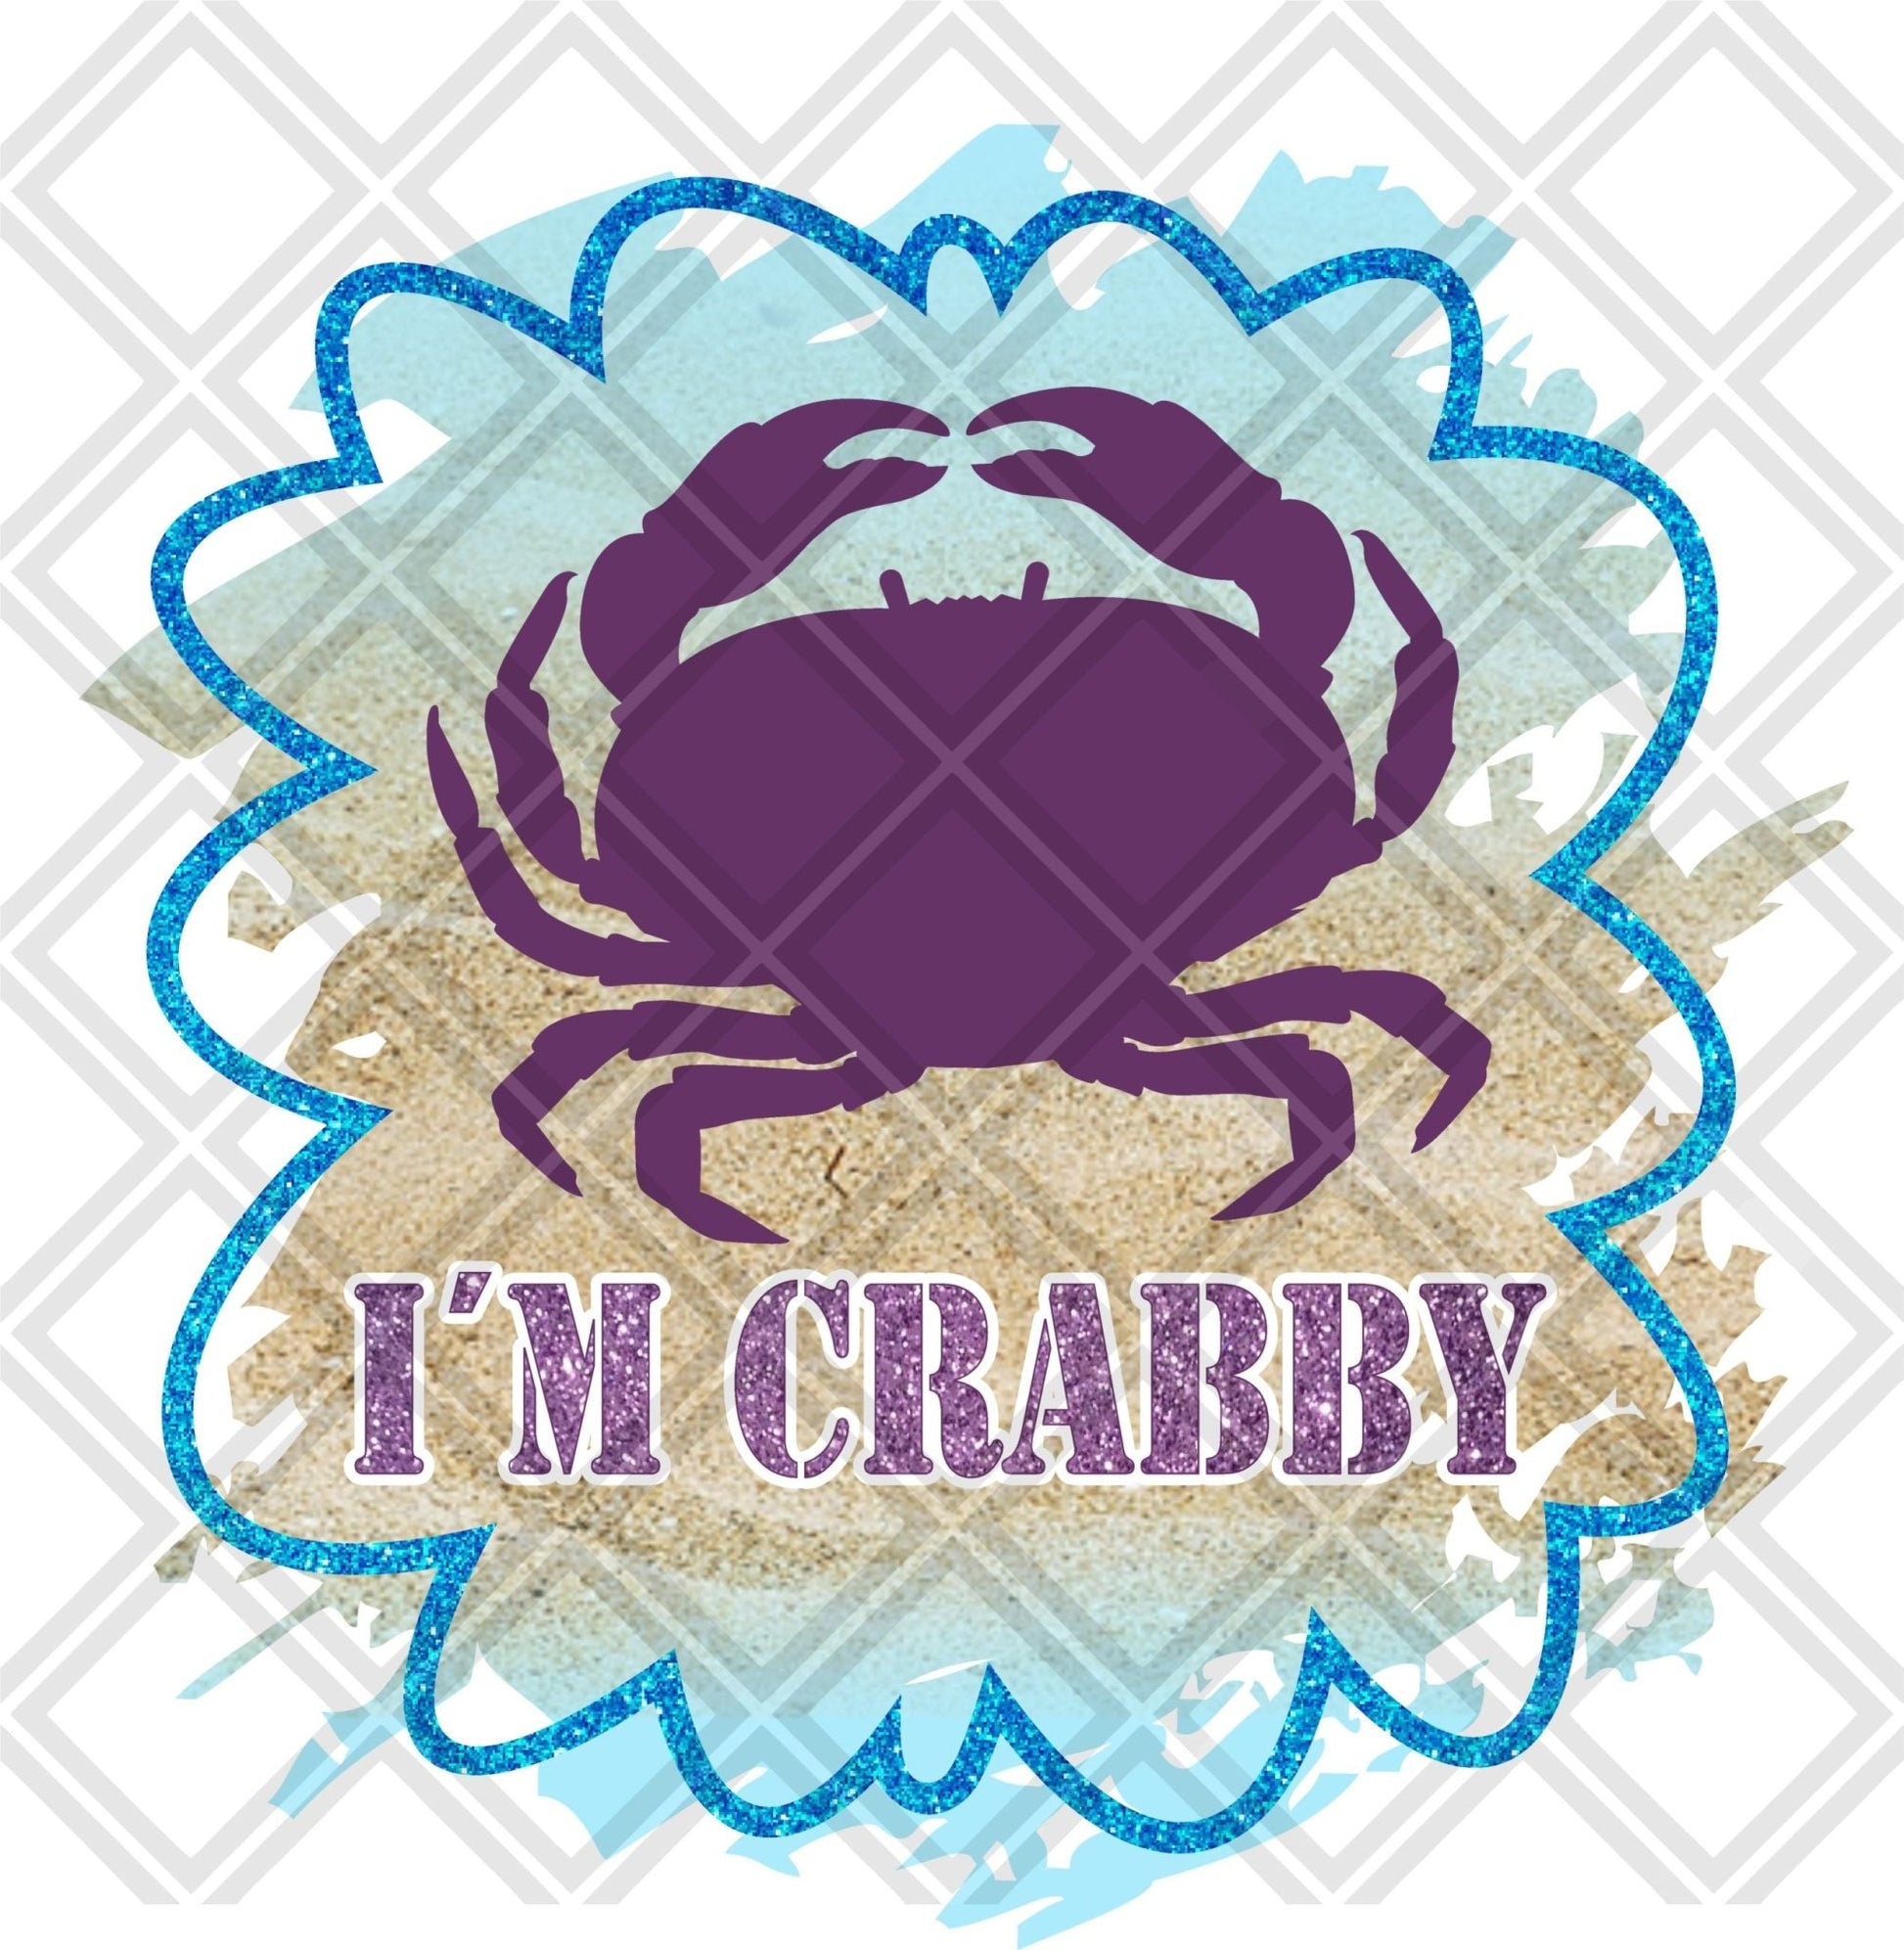 IM CRABBY CRAB Digital Download Instand Download - Do it yourself Transfers